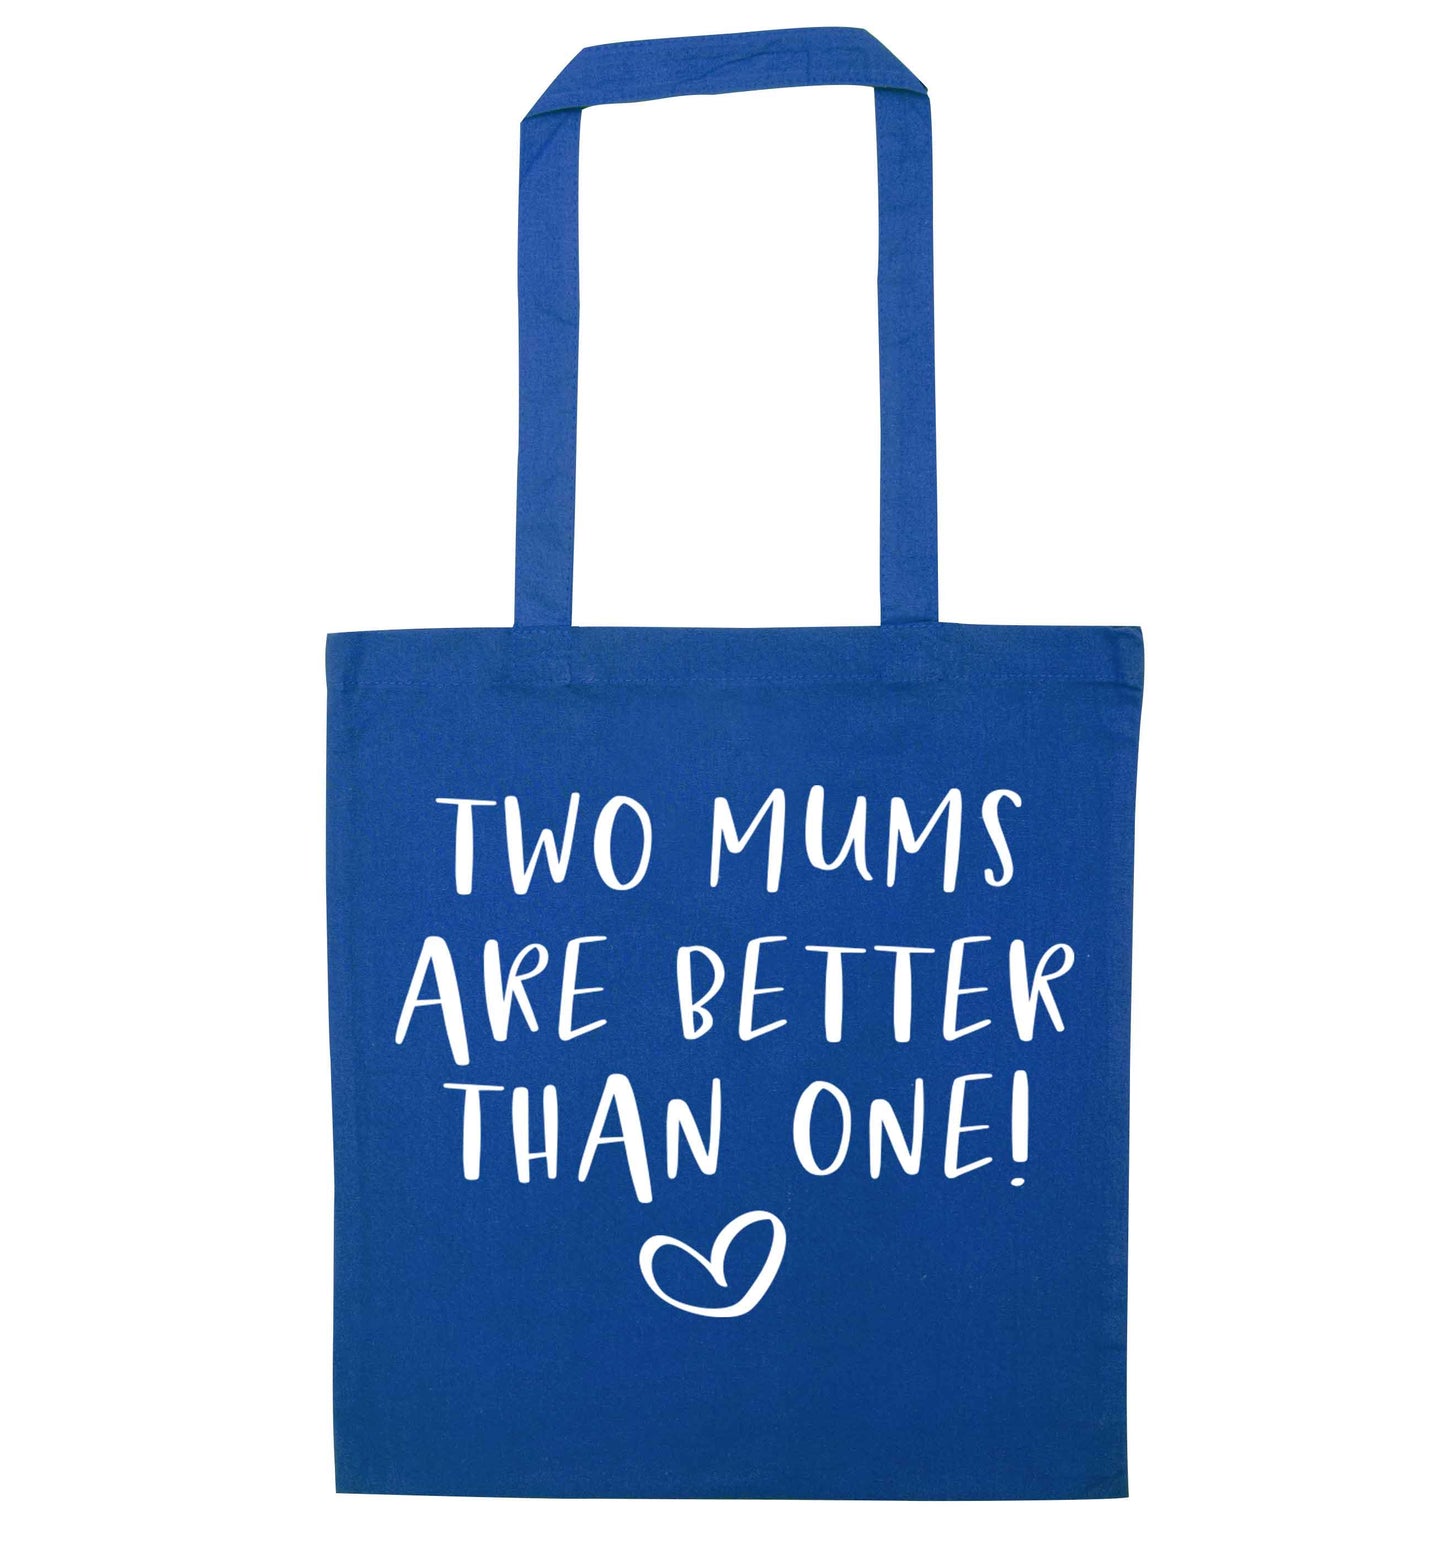 Two mums are better than one blue tote bag